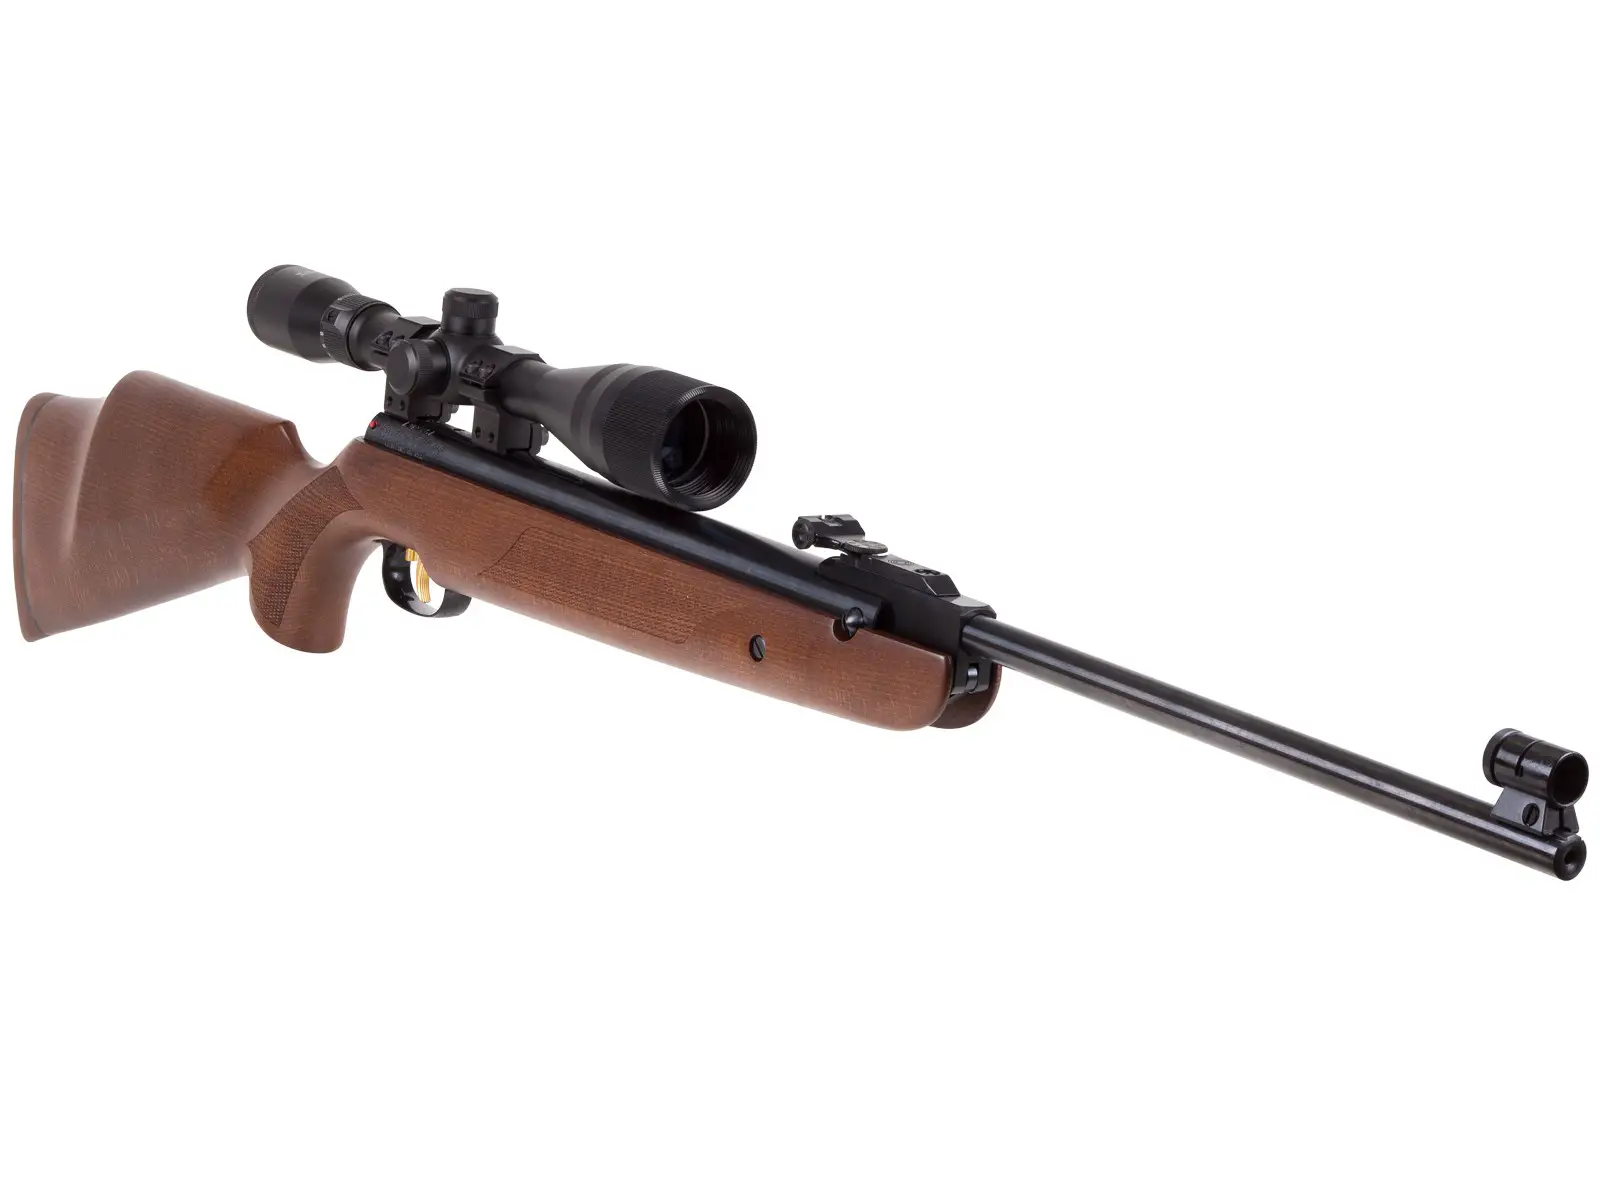 r9 2 Best Spring Air Rifles - Top 7 Springers for the money (Reviews & Buying Guides 2022)